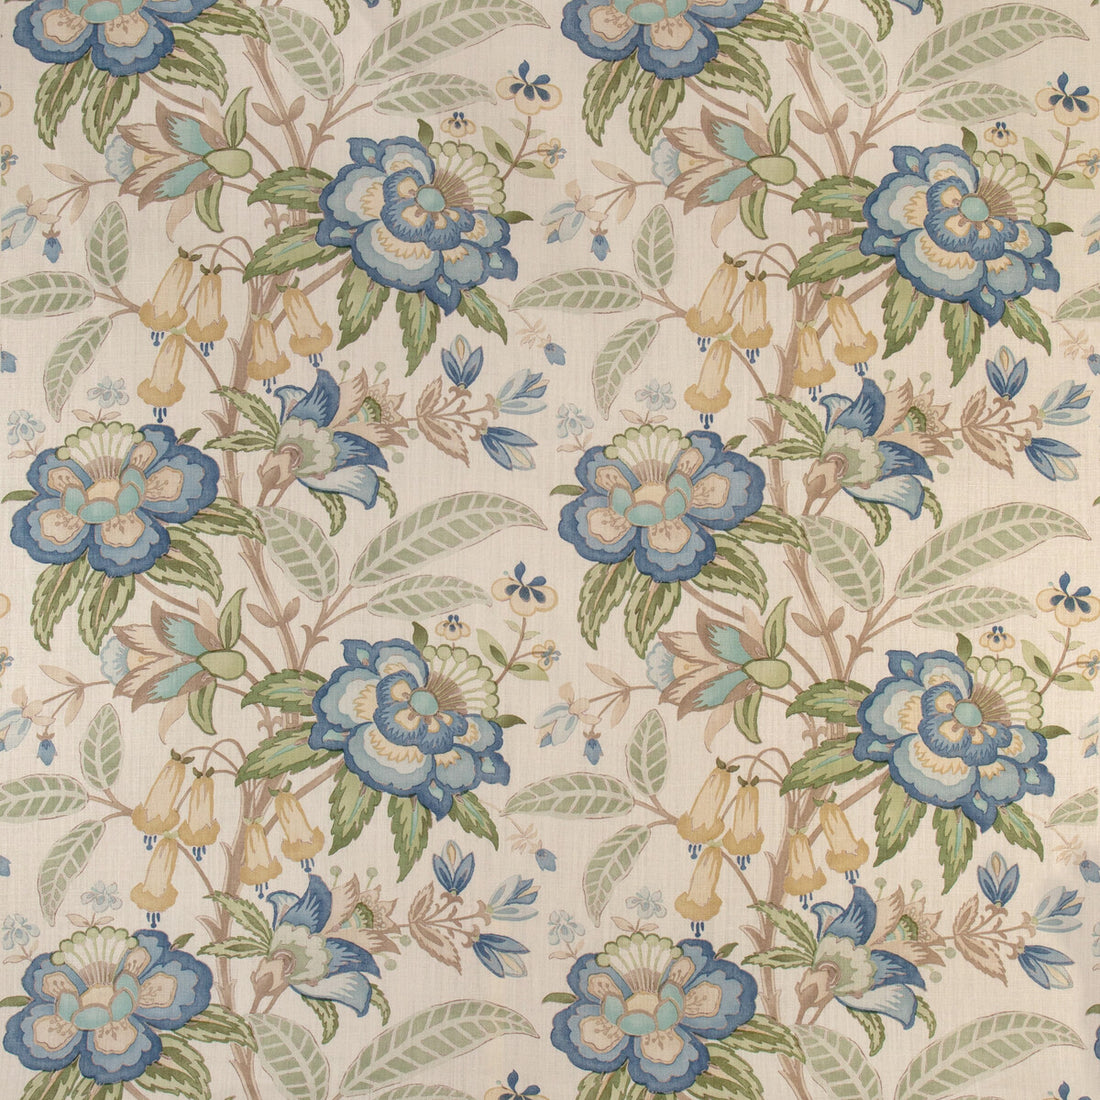 Davenport Print fabric in pacific color - pattern 2017164.530.0 - by Lee Jofa in the Garden Walk collection